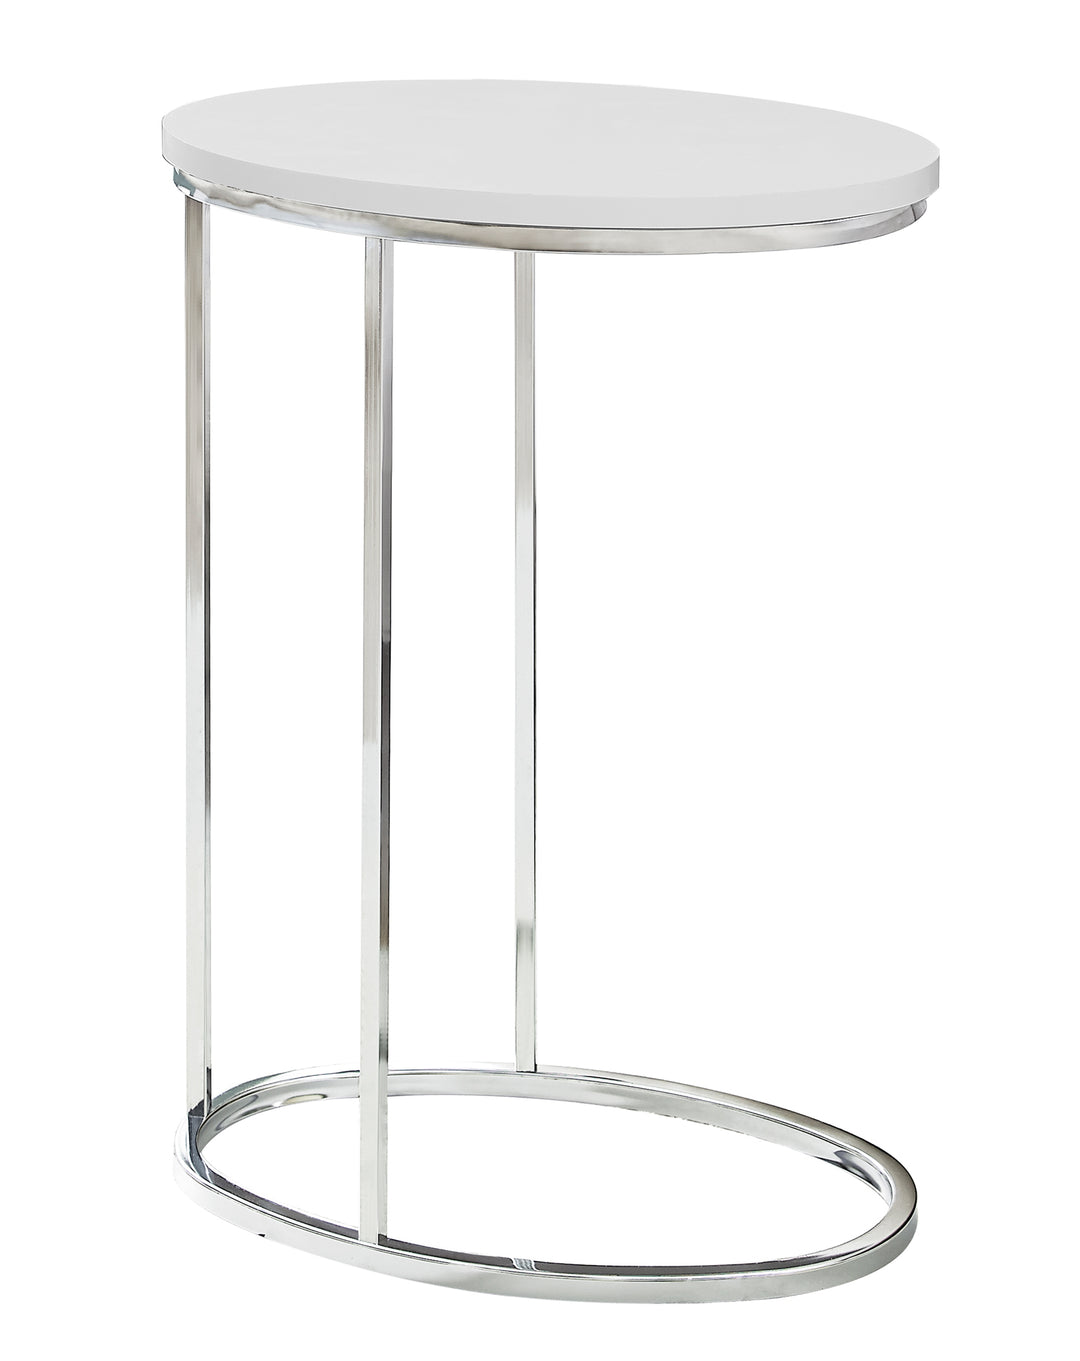 18.5" x 12" x 25" White Particle Board Metal Accent Table